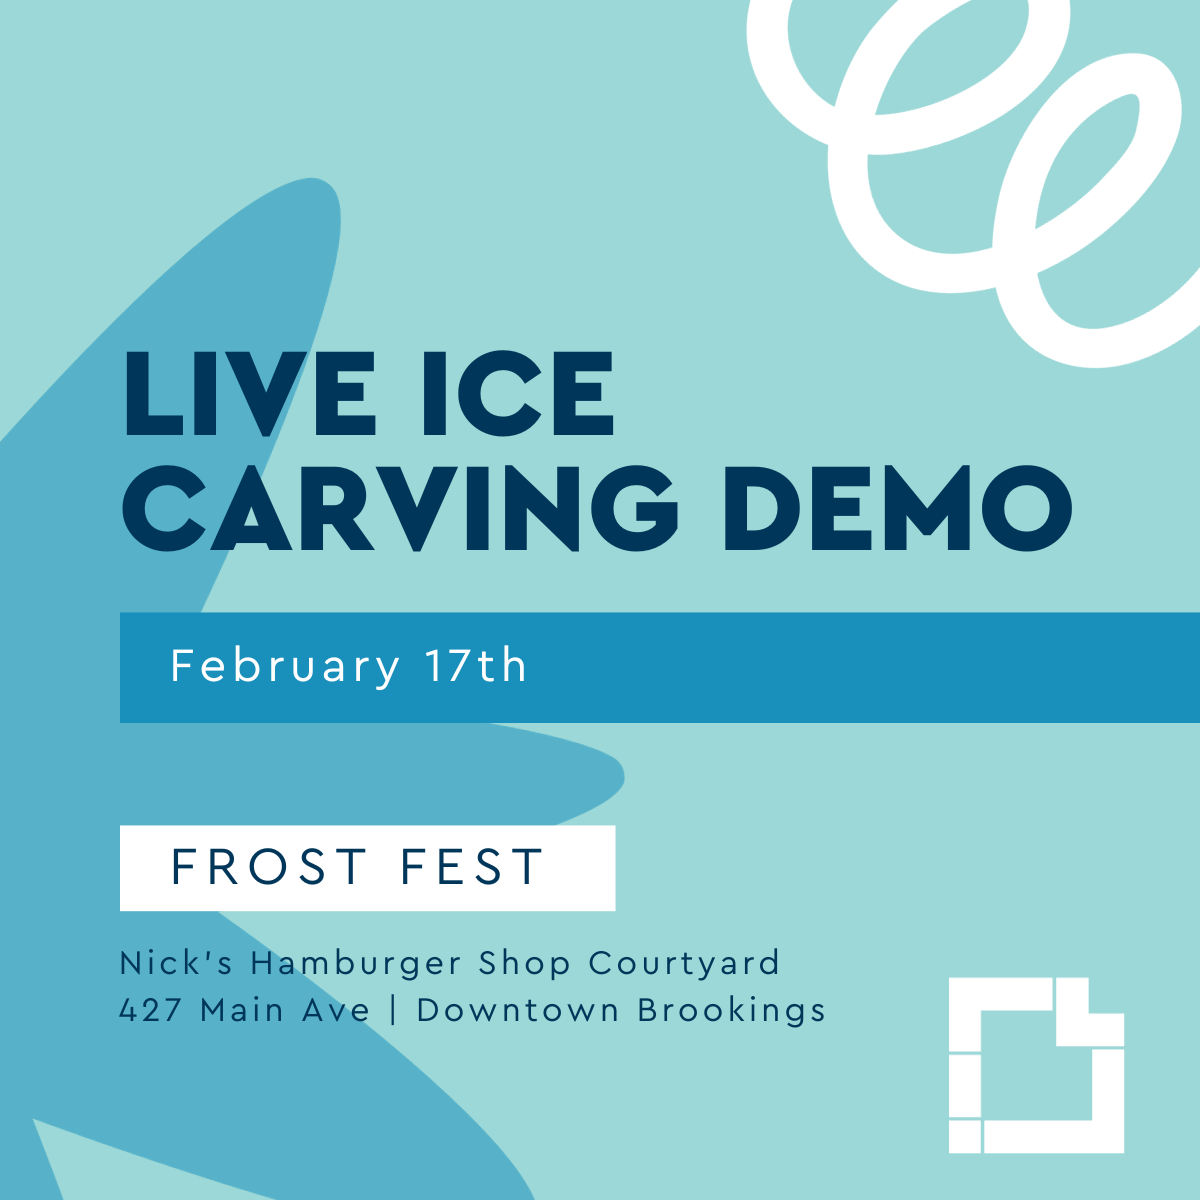 Live Ice Carving Demo in Downtown Brookings